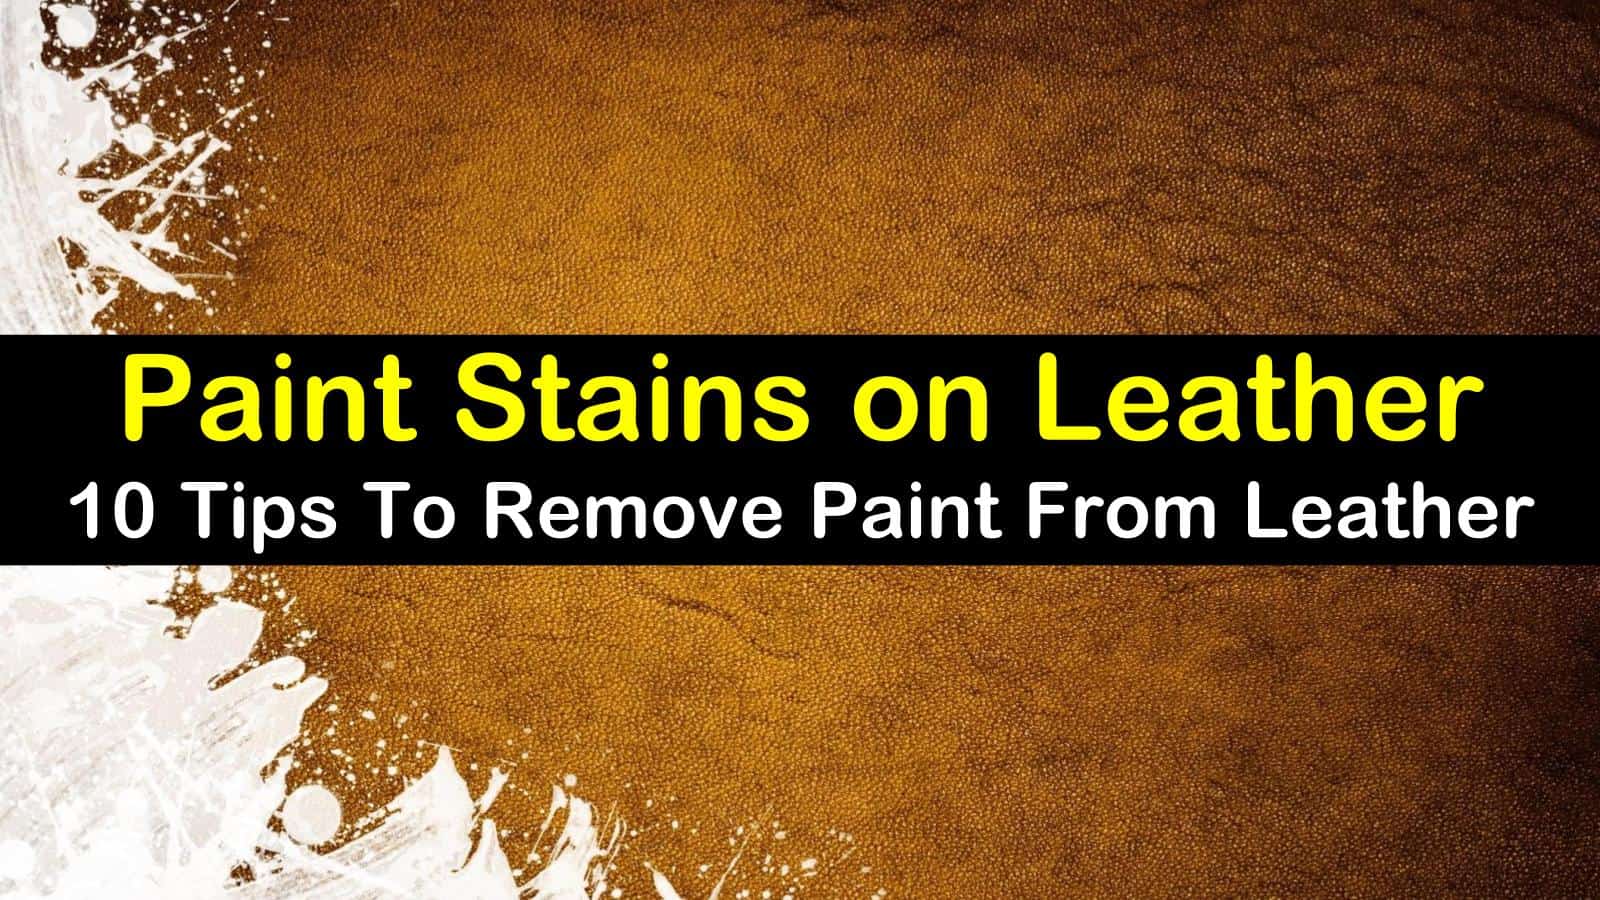 10 Fantastic Ways To Remove Paint From Leather - How To Clean Paint From Leather Car Seats